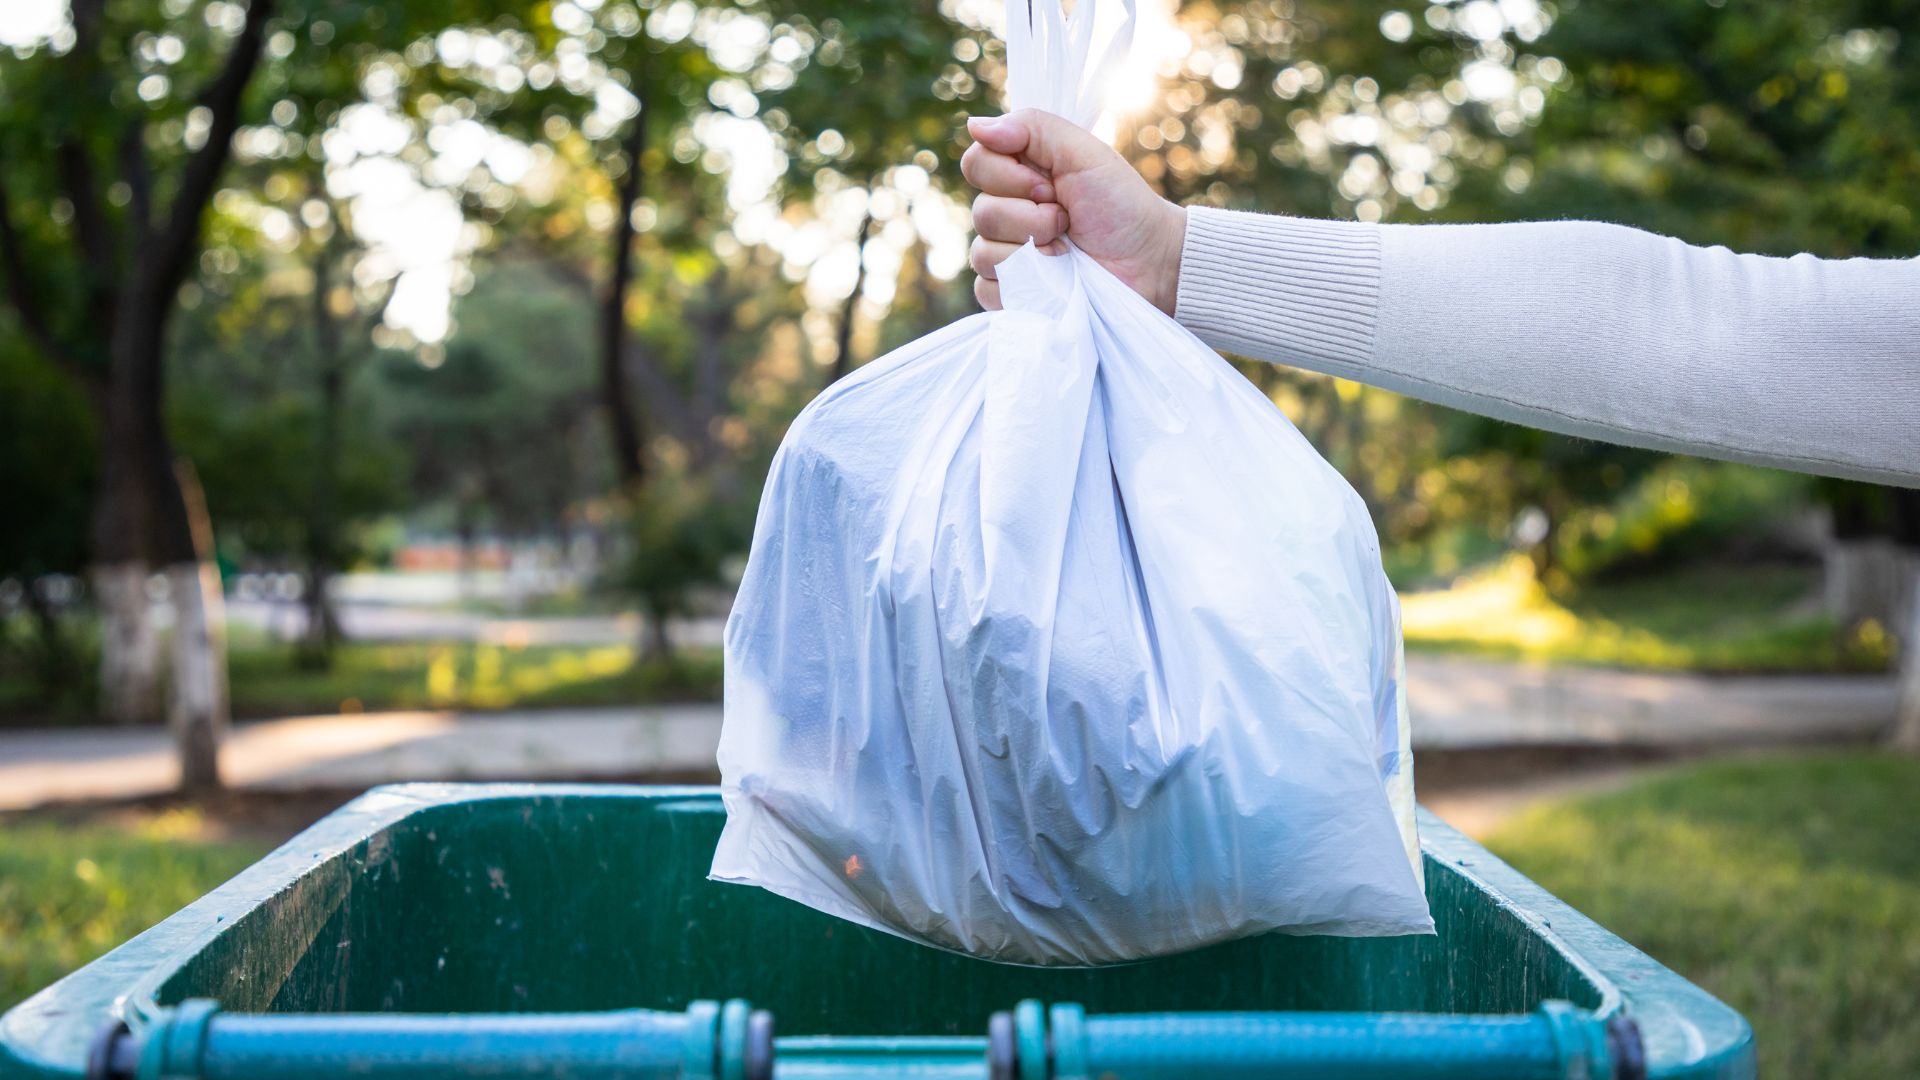 An image of a person throwing away a bag of trash into a garbage container with a lid.